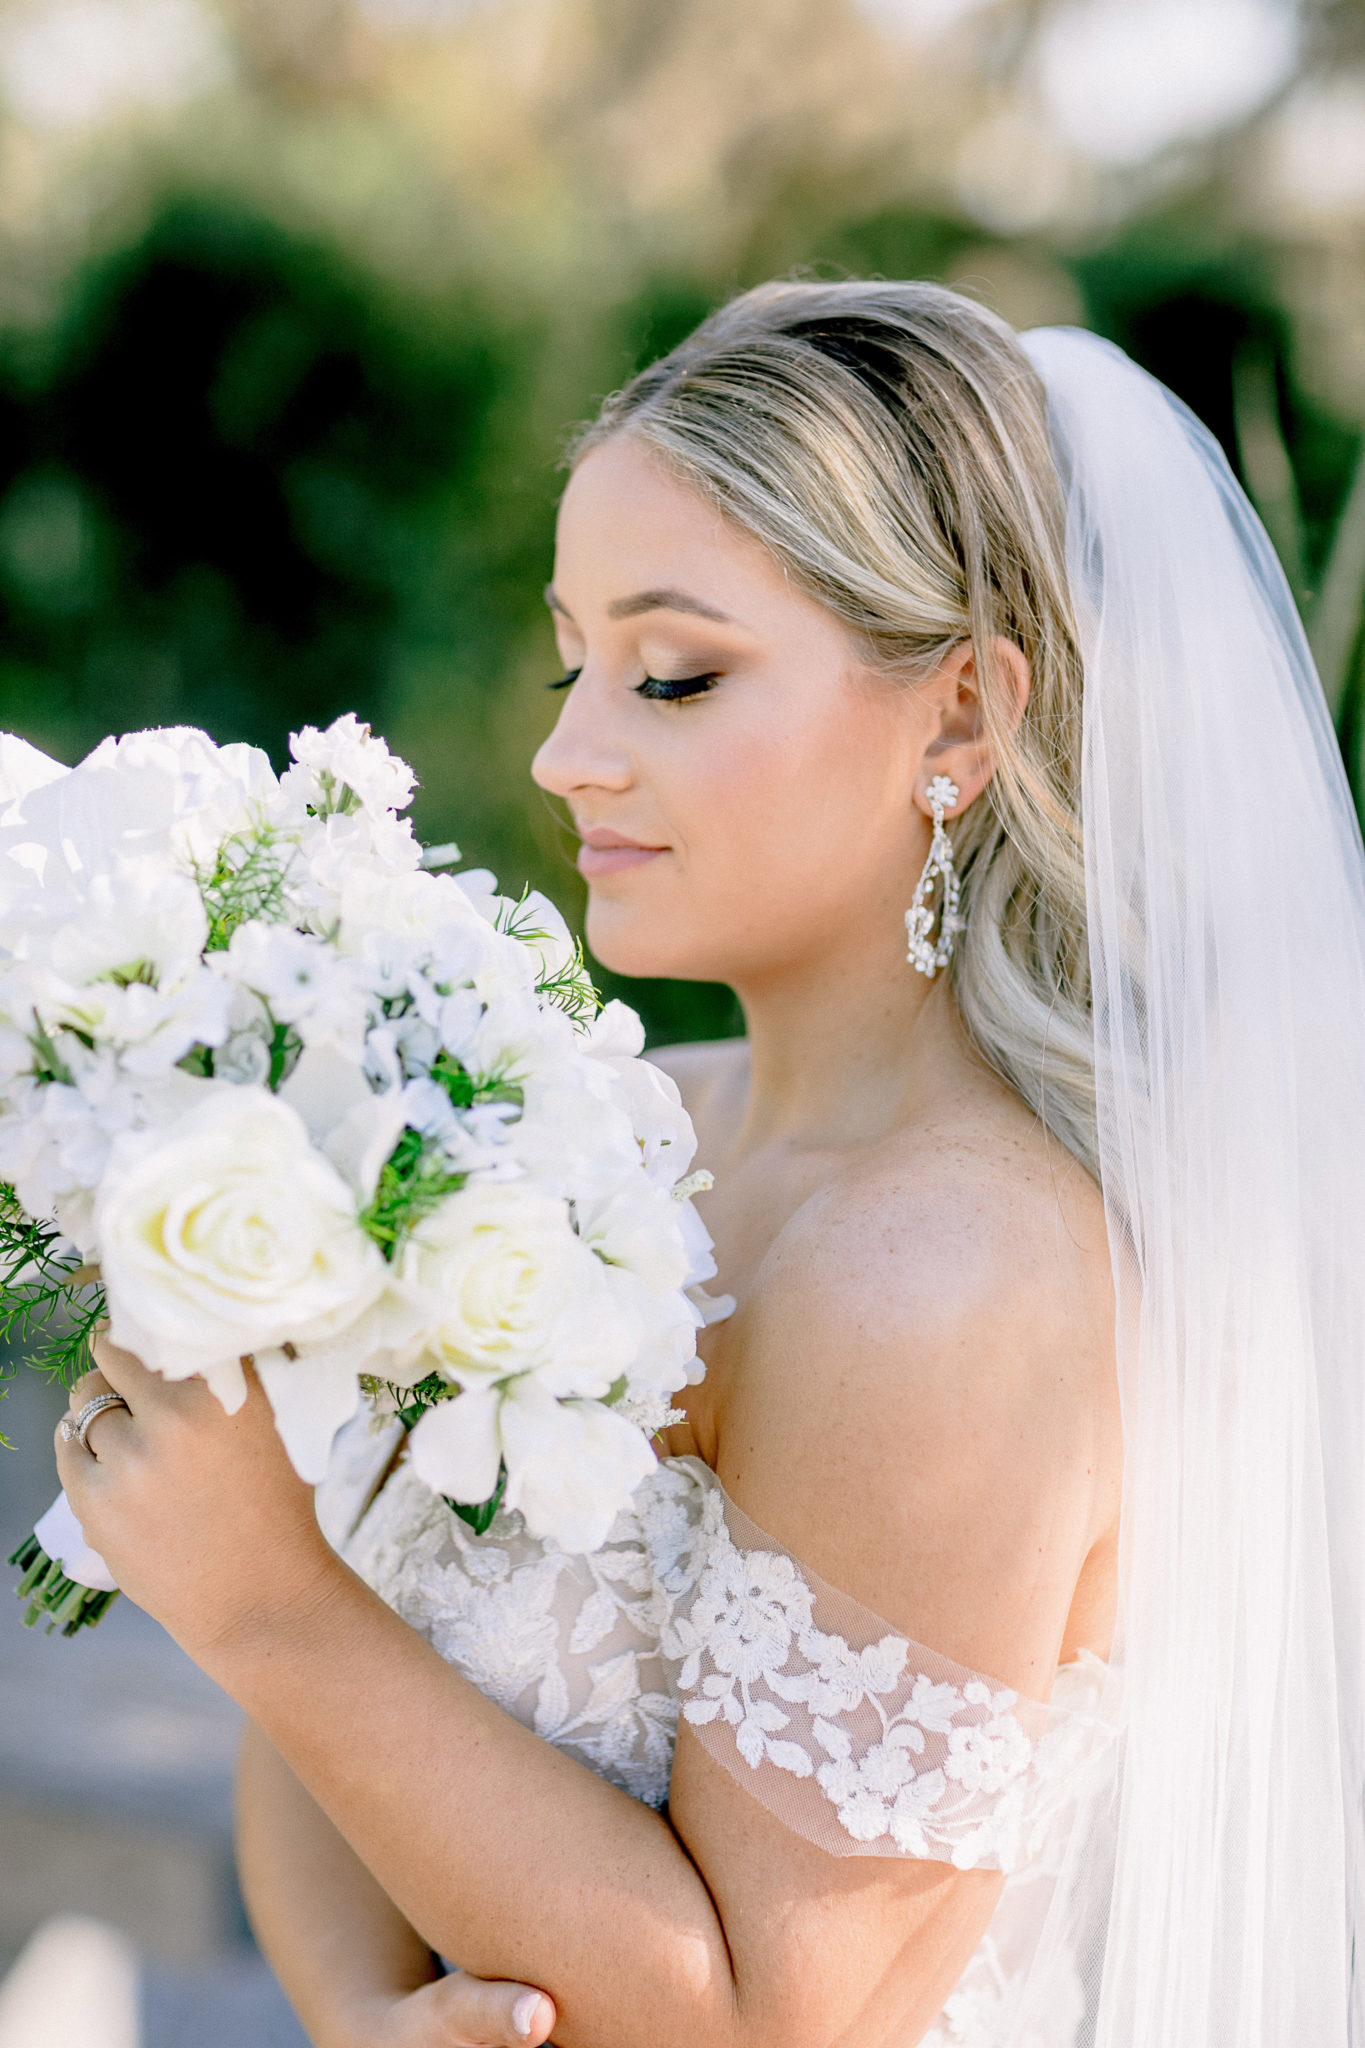 New Orleans City Park Bridals in Fall | TEP Journal